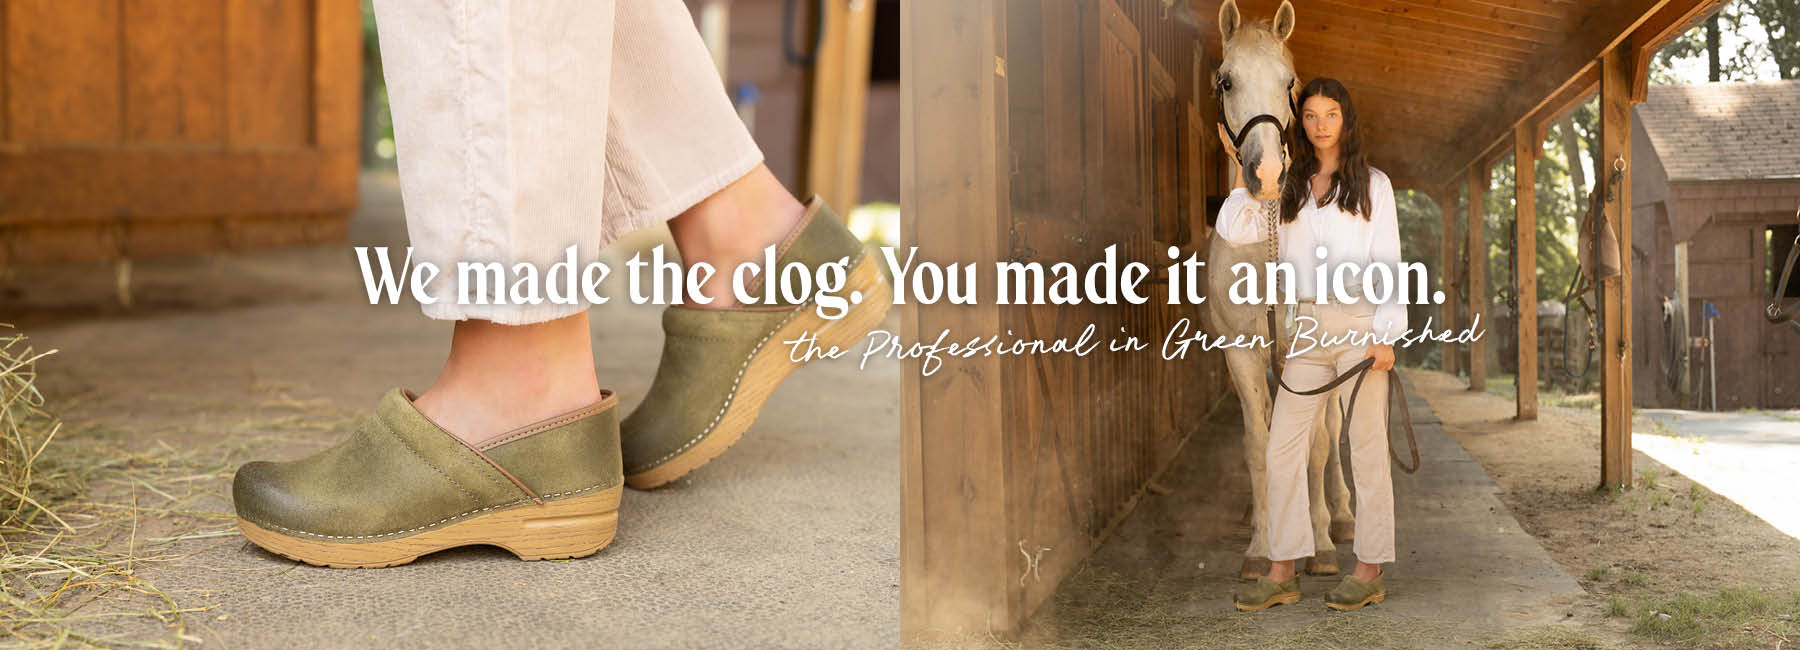 Collage style banner with a close up on-foot of Professional Green Burnished Clog on the left, and a lifestyle image of a brunette girl in white shirt and khaki pants in a barn setting in front of a white horse on the right. Text reads: We made the clog. You made it an icon. The Professional in Green Burnished